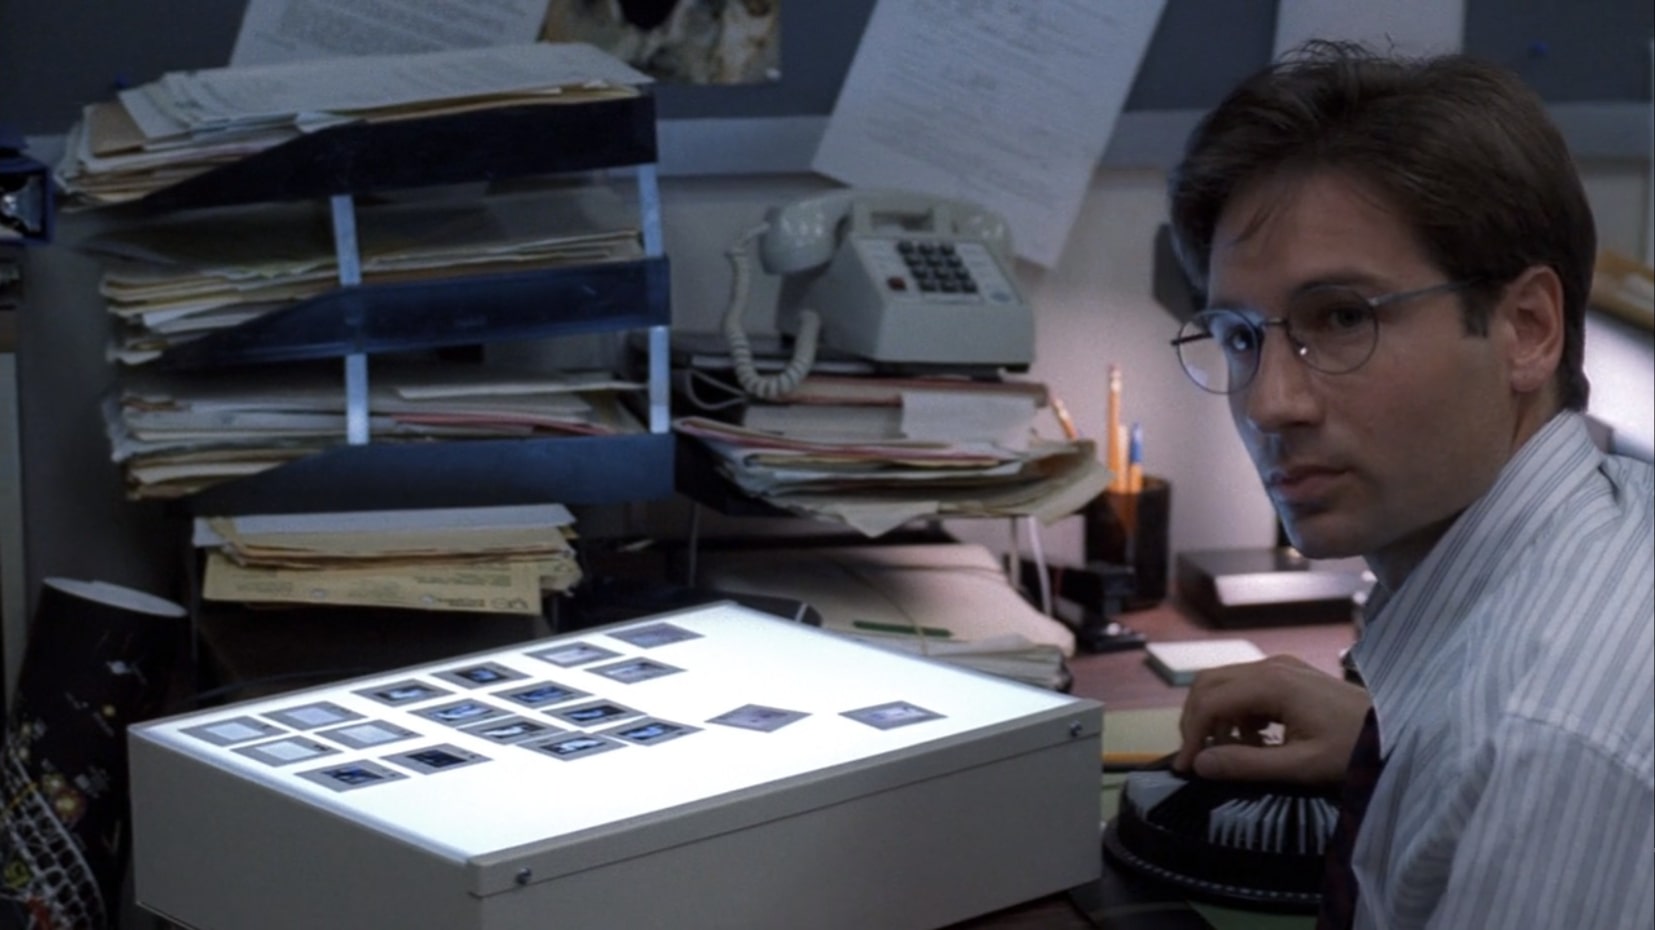 David Duchovny, playing Fox Mulder, looks up from his work in a cluttered office space. He's wearing round glasses and a thin striped button up shirt. On the desk in front of him is a lightbox, where some slides are arranged in rows for examination.